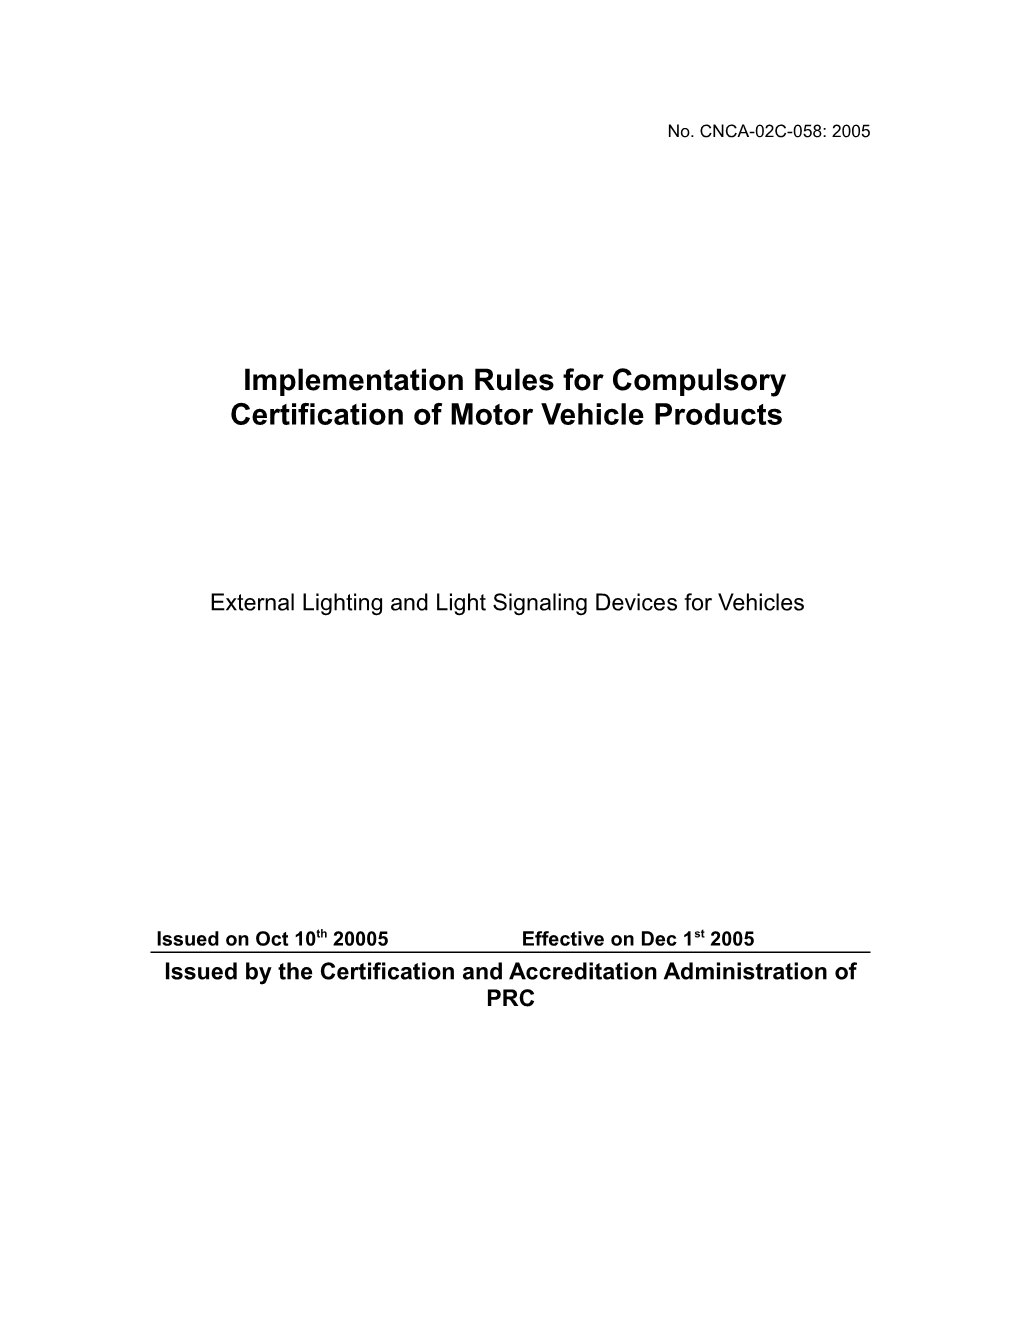 Implementation Rules for Compulsory Certification of Motor Vehicleproducts